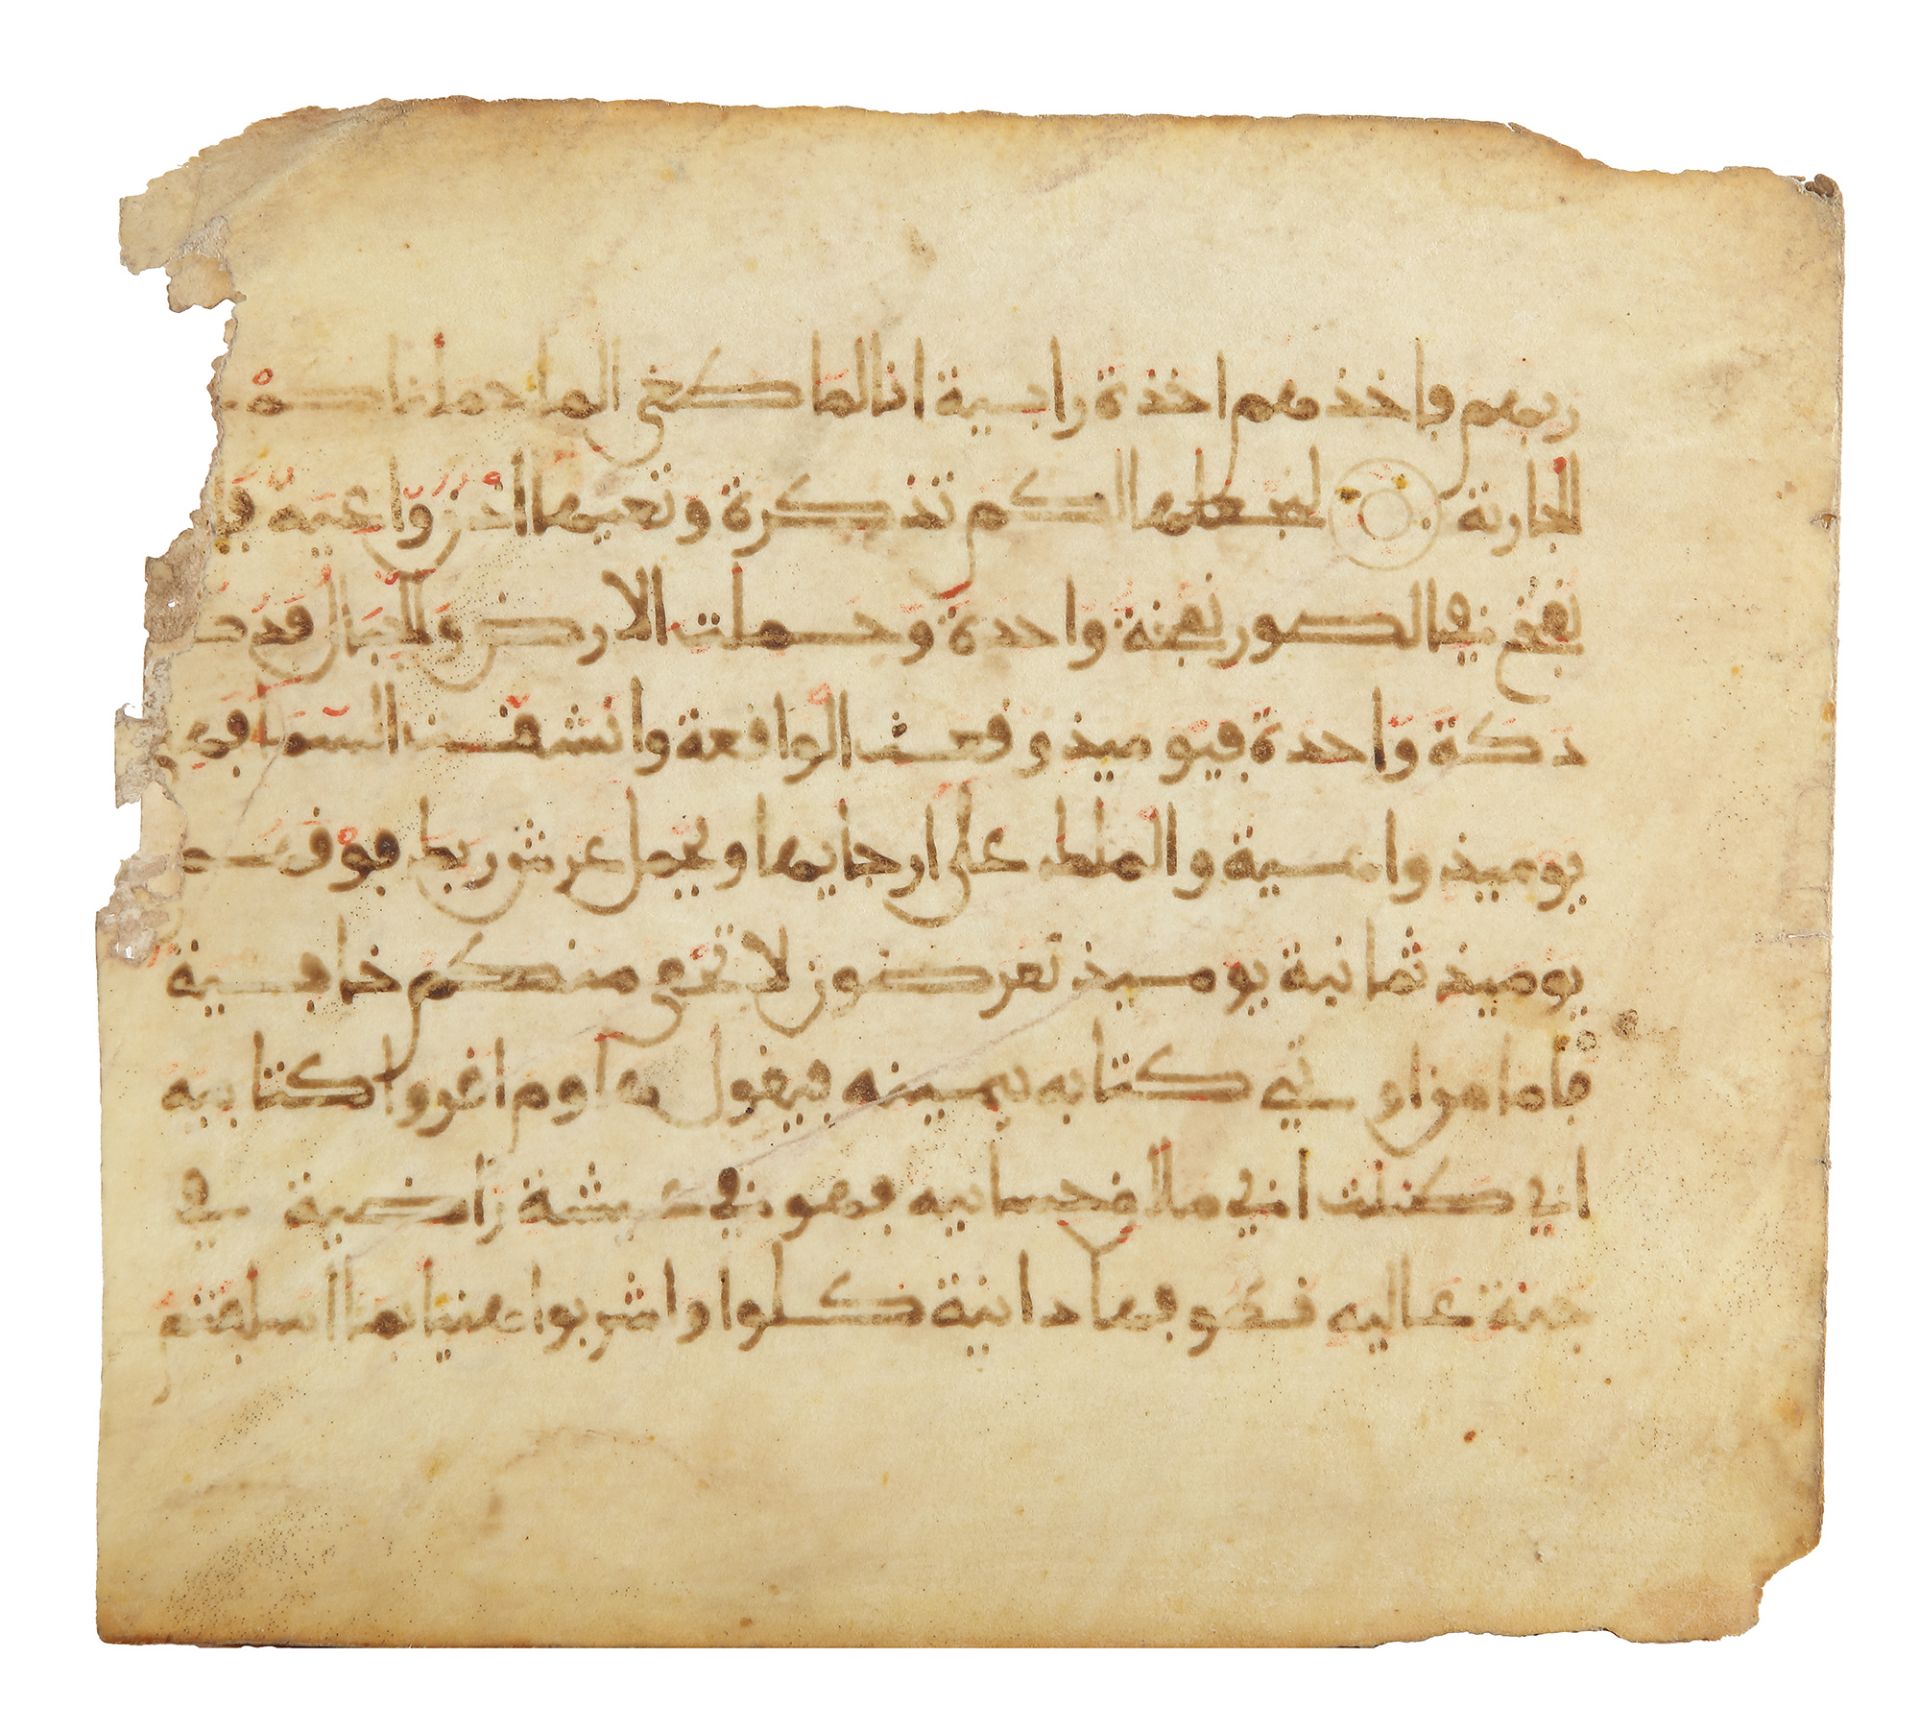 TWO QURAN FOLIOS FROM A MAGHRIBI QURAN, NORTH AFRICA, 13TH-14TH CENTURY - Image 3 of 4